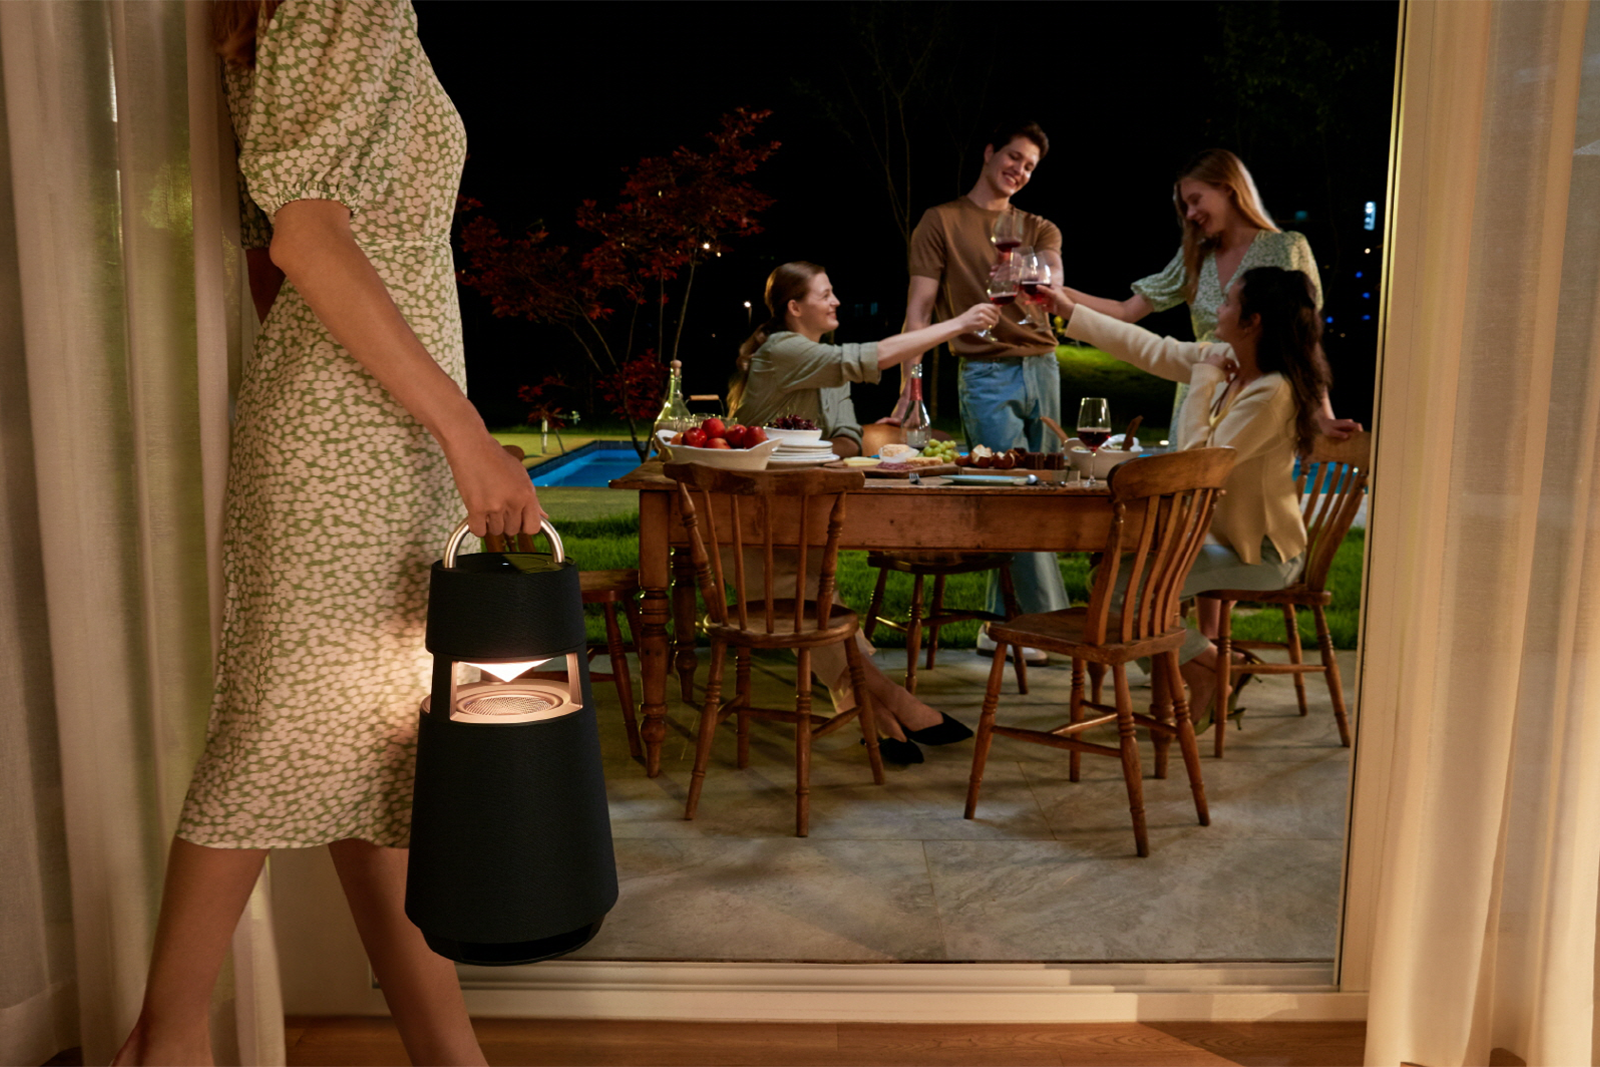 LG's Xboom 360 speaker is a Sonos Move competitor with some bells and whistles photo 3